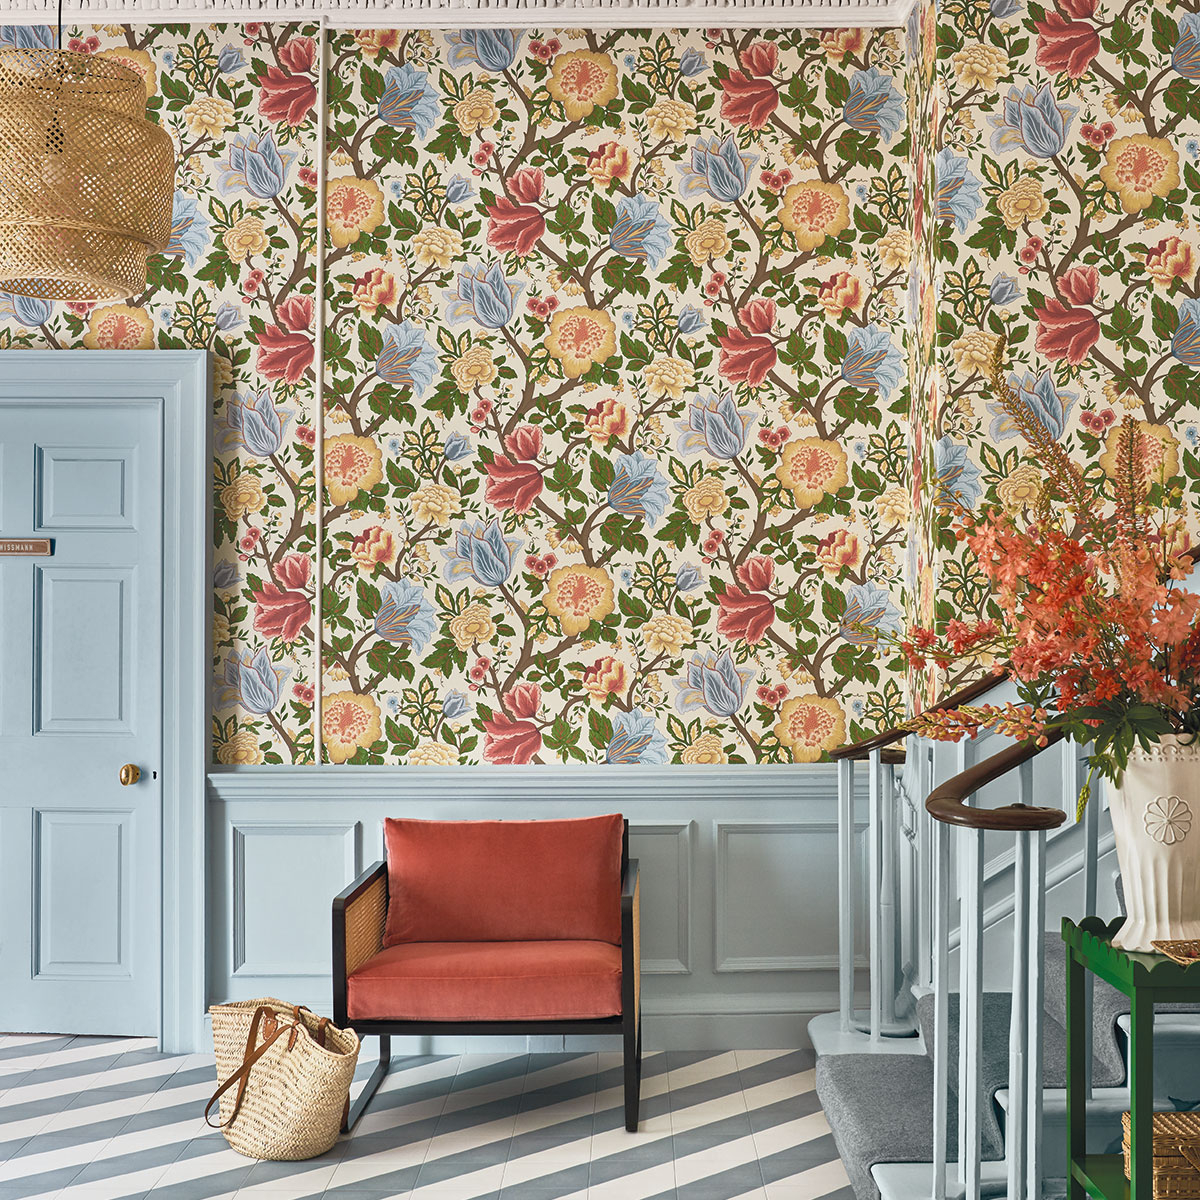 Interior designer and colour lover Sophie Robinson shares some top tips on how to use wallpaper. In this entrance hall a classic floral design is combined with pale blue panelling and a modern diagonal striped tiled floor. #entrancehall #sophierobinson #panelling